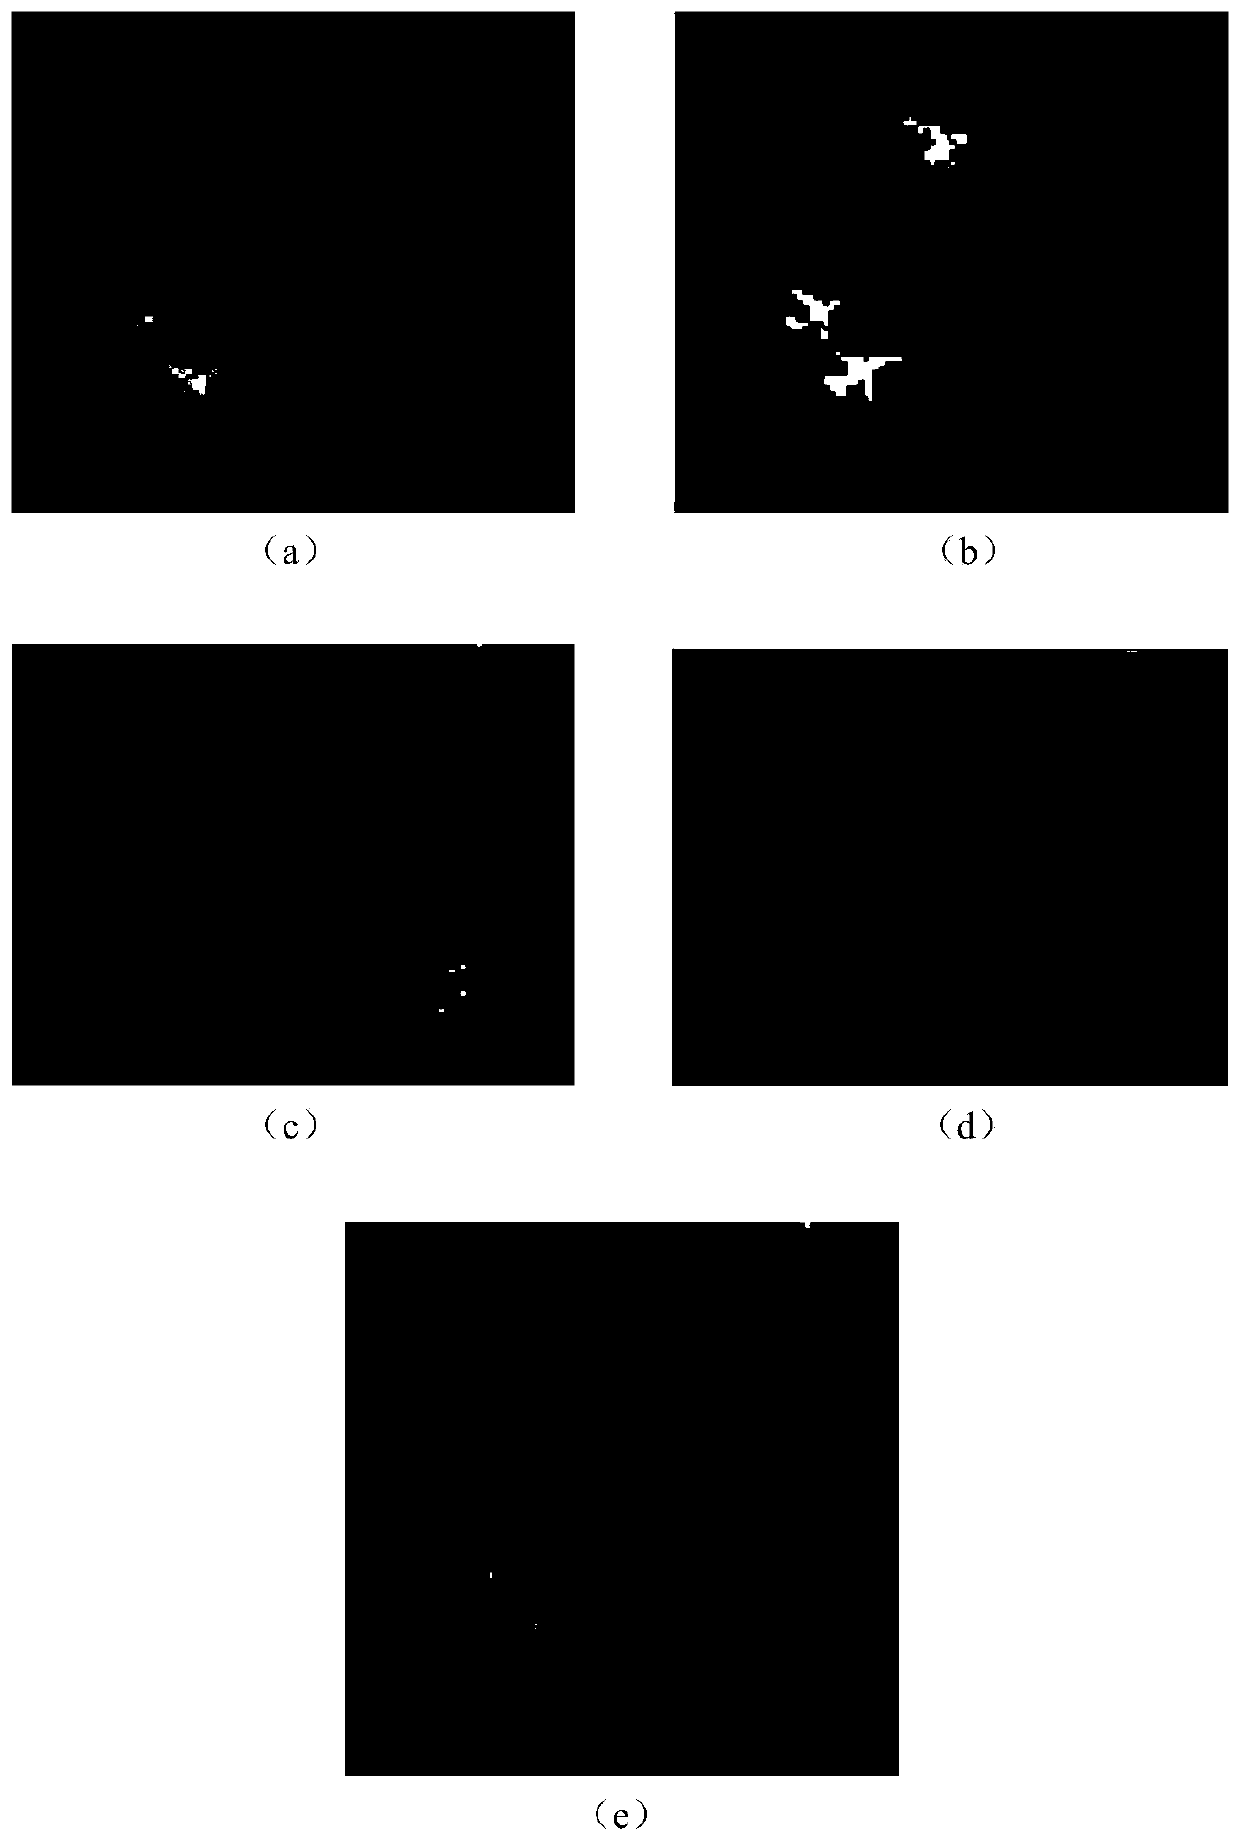 A hyperspectral anomaly detection method based on an adversarial self-coding network